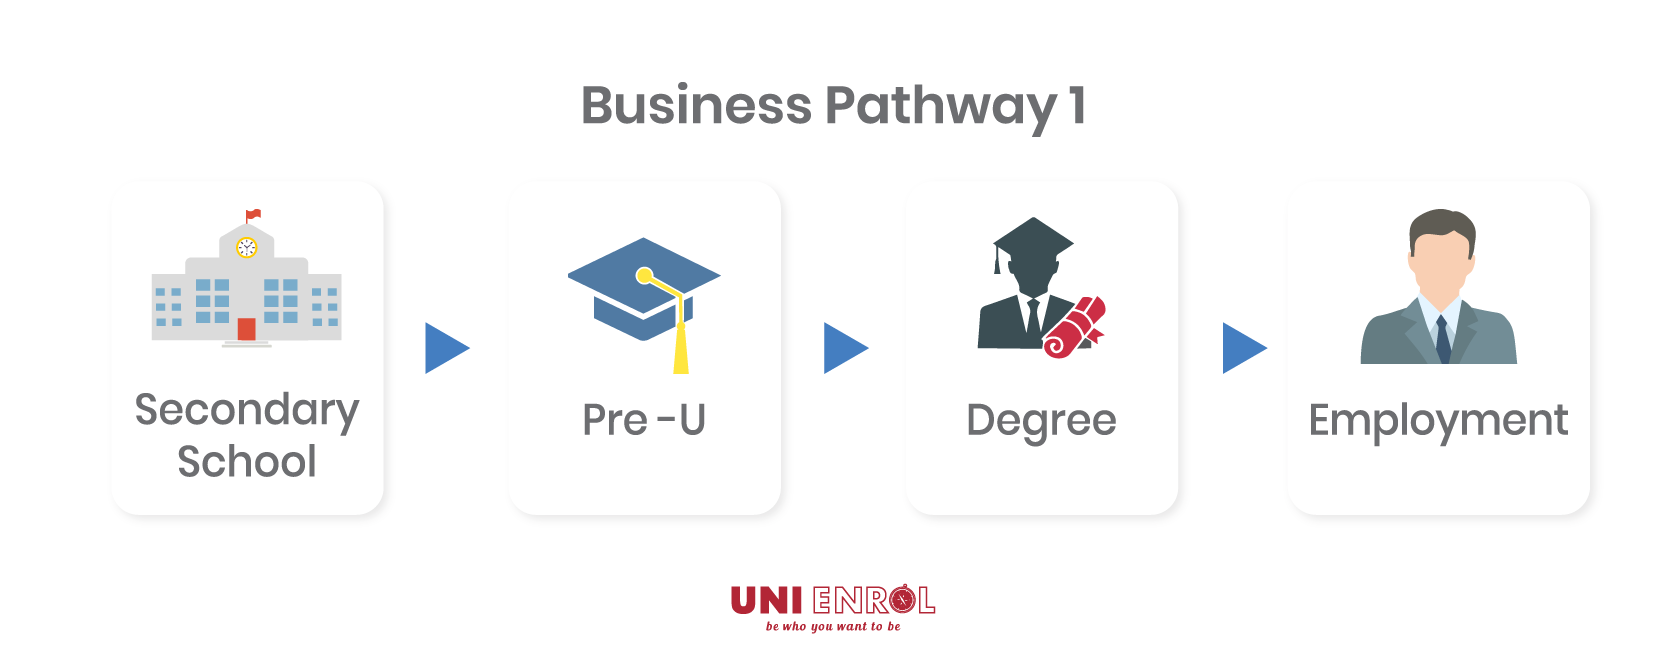 Pathway to study business in Malaysia